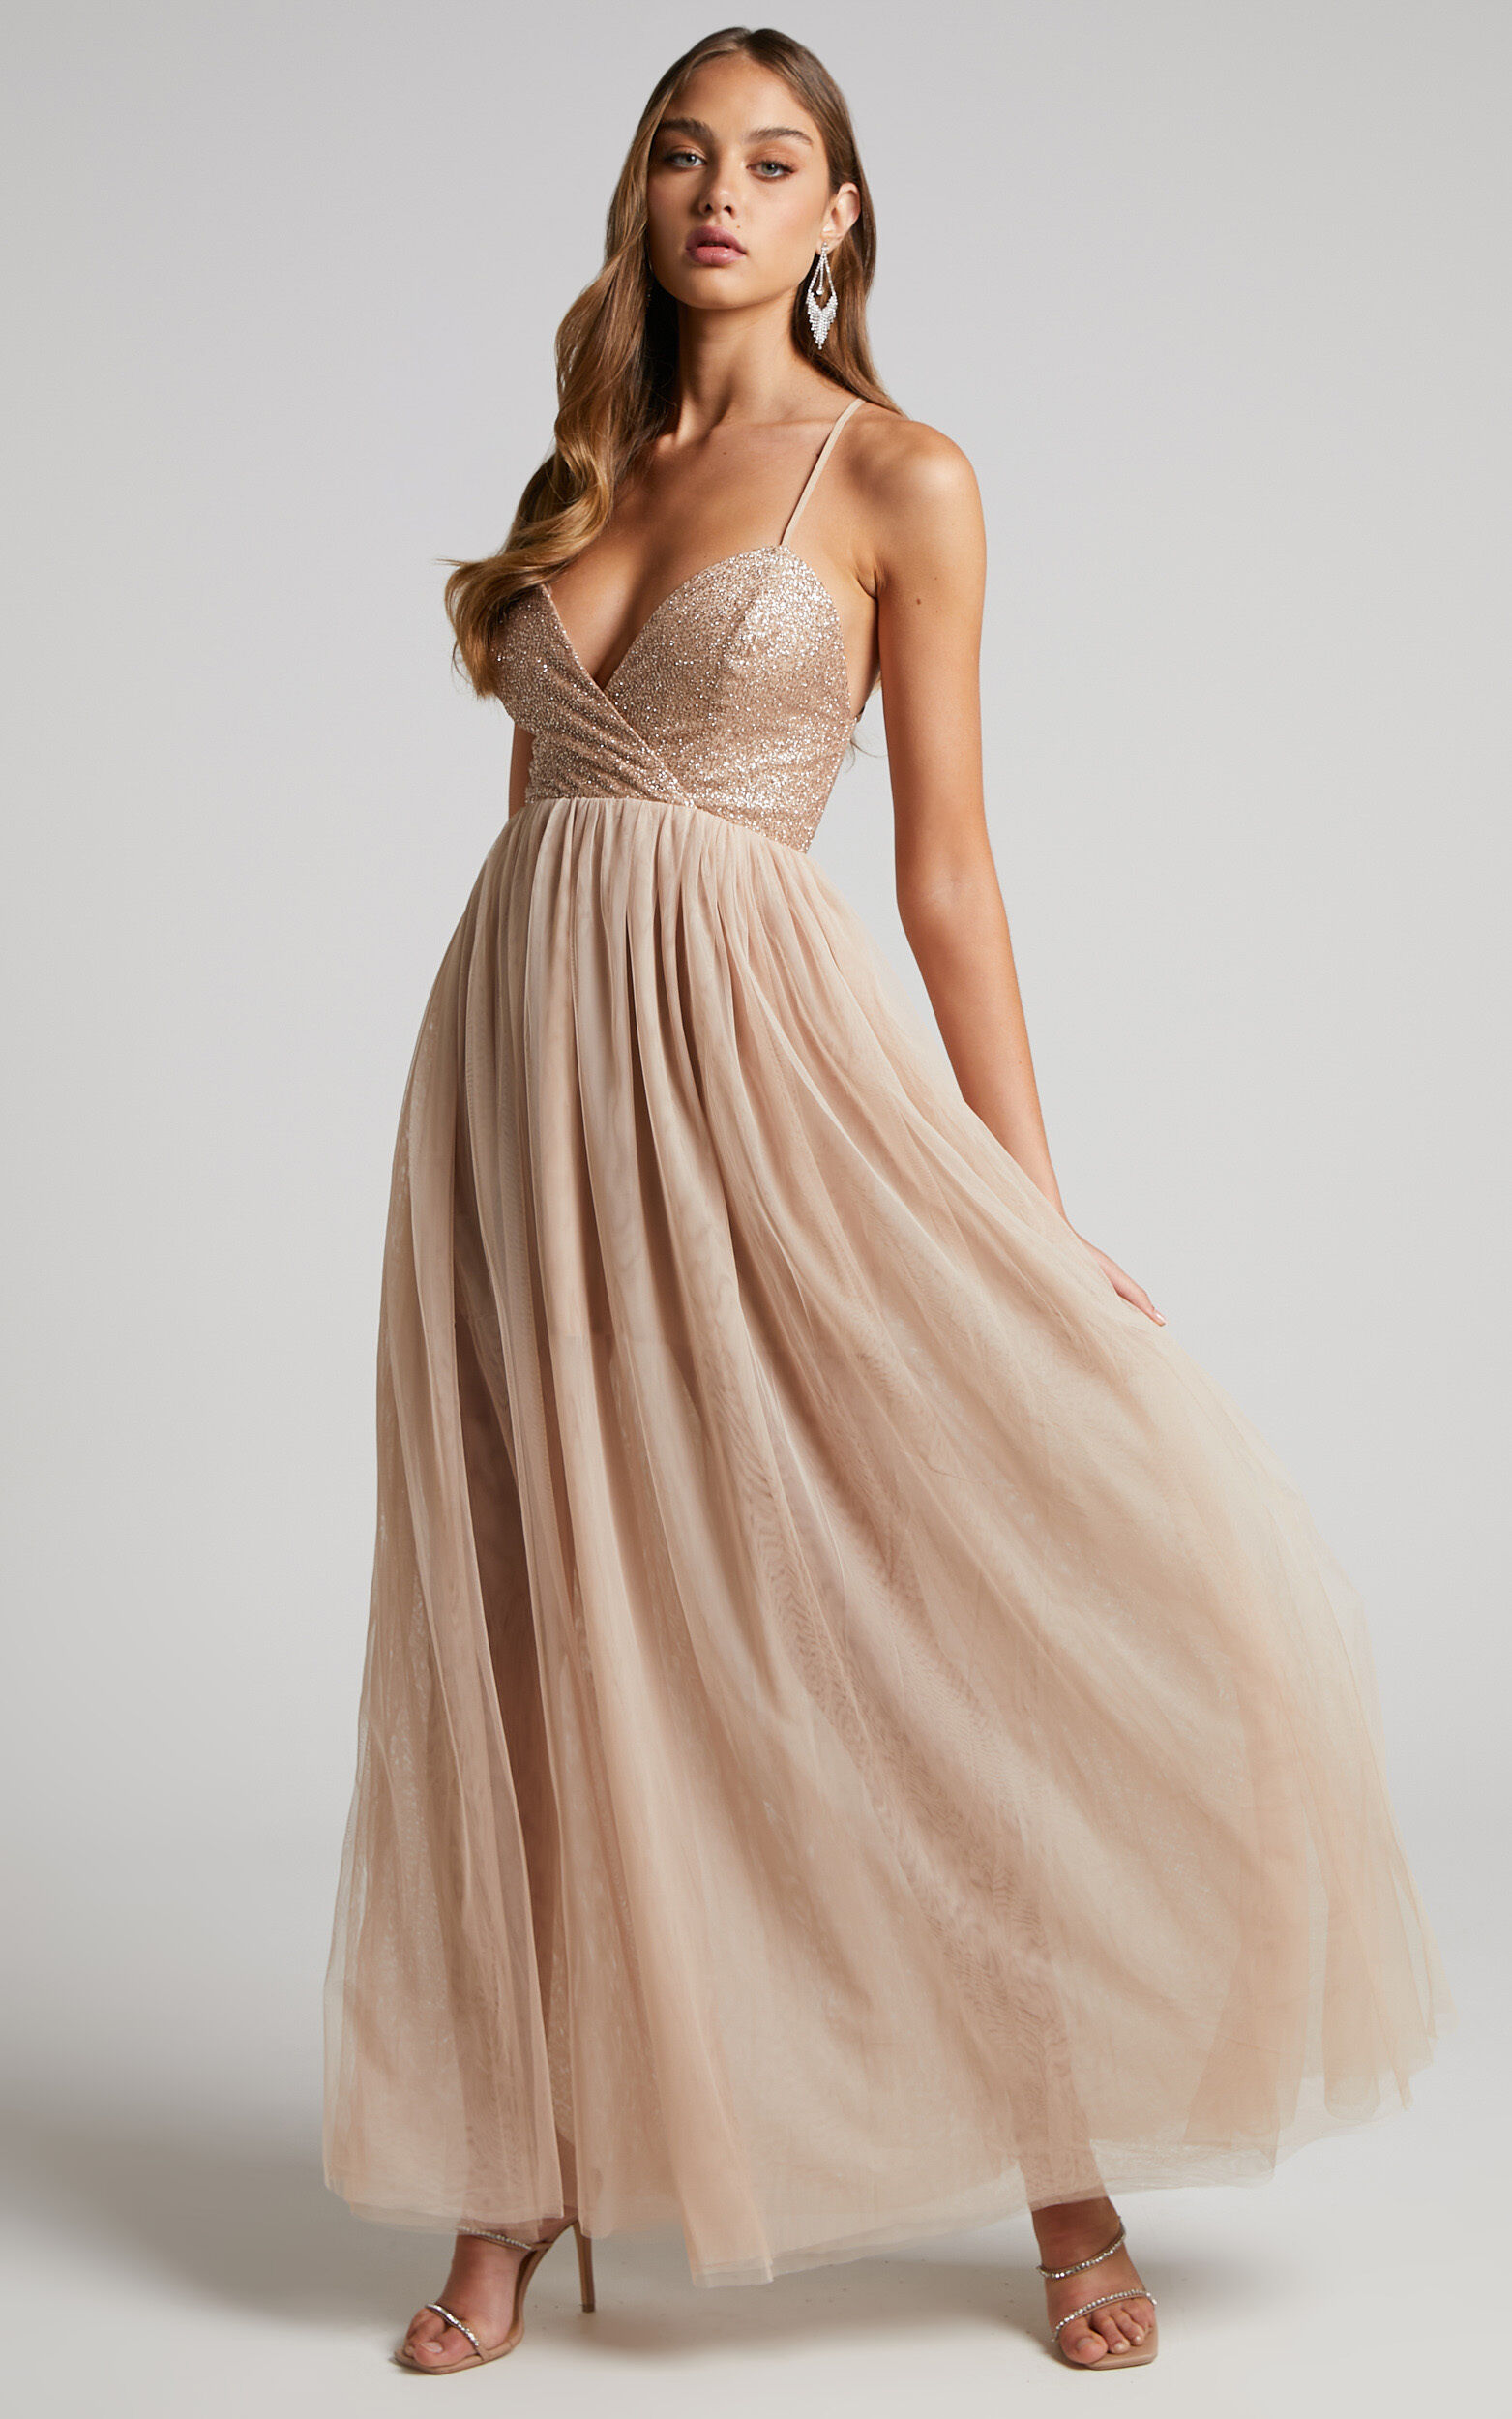 Deevey Maxi Dress - Open Back Glitter Bodice Tulle Dress in Nude - 04, BRN1, super-hi-res image number null